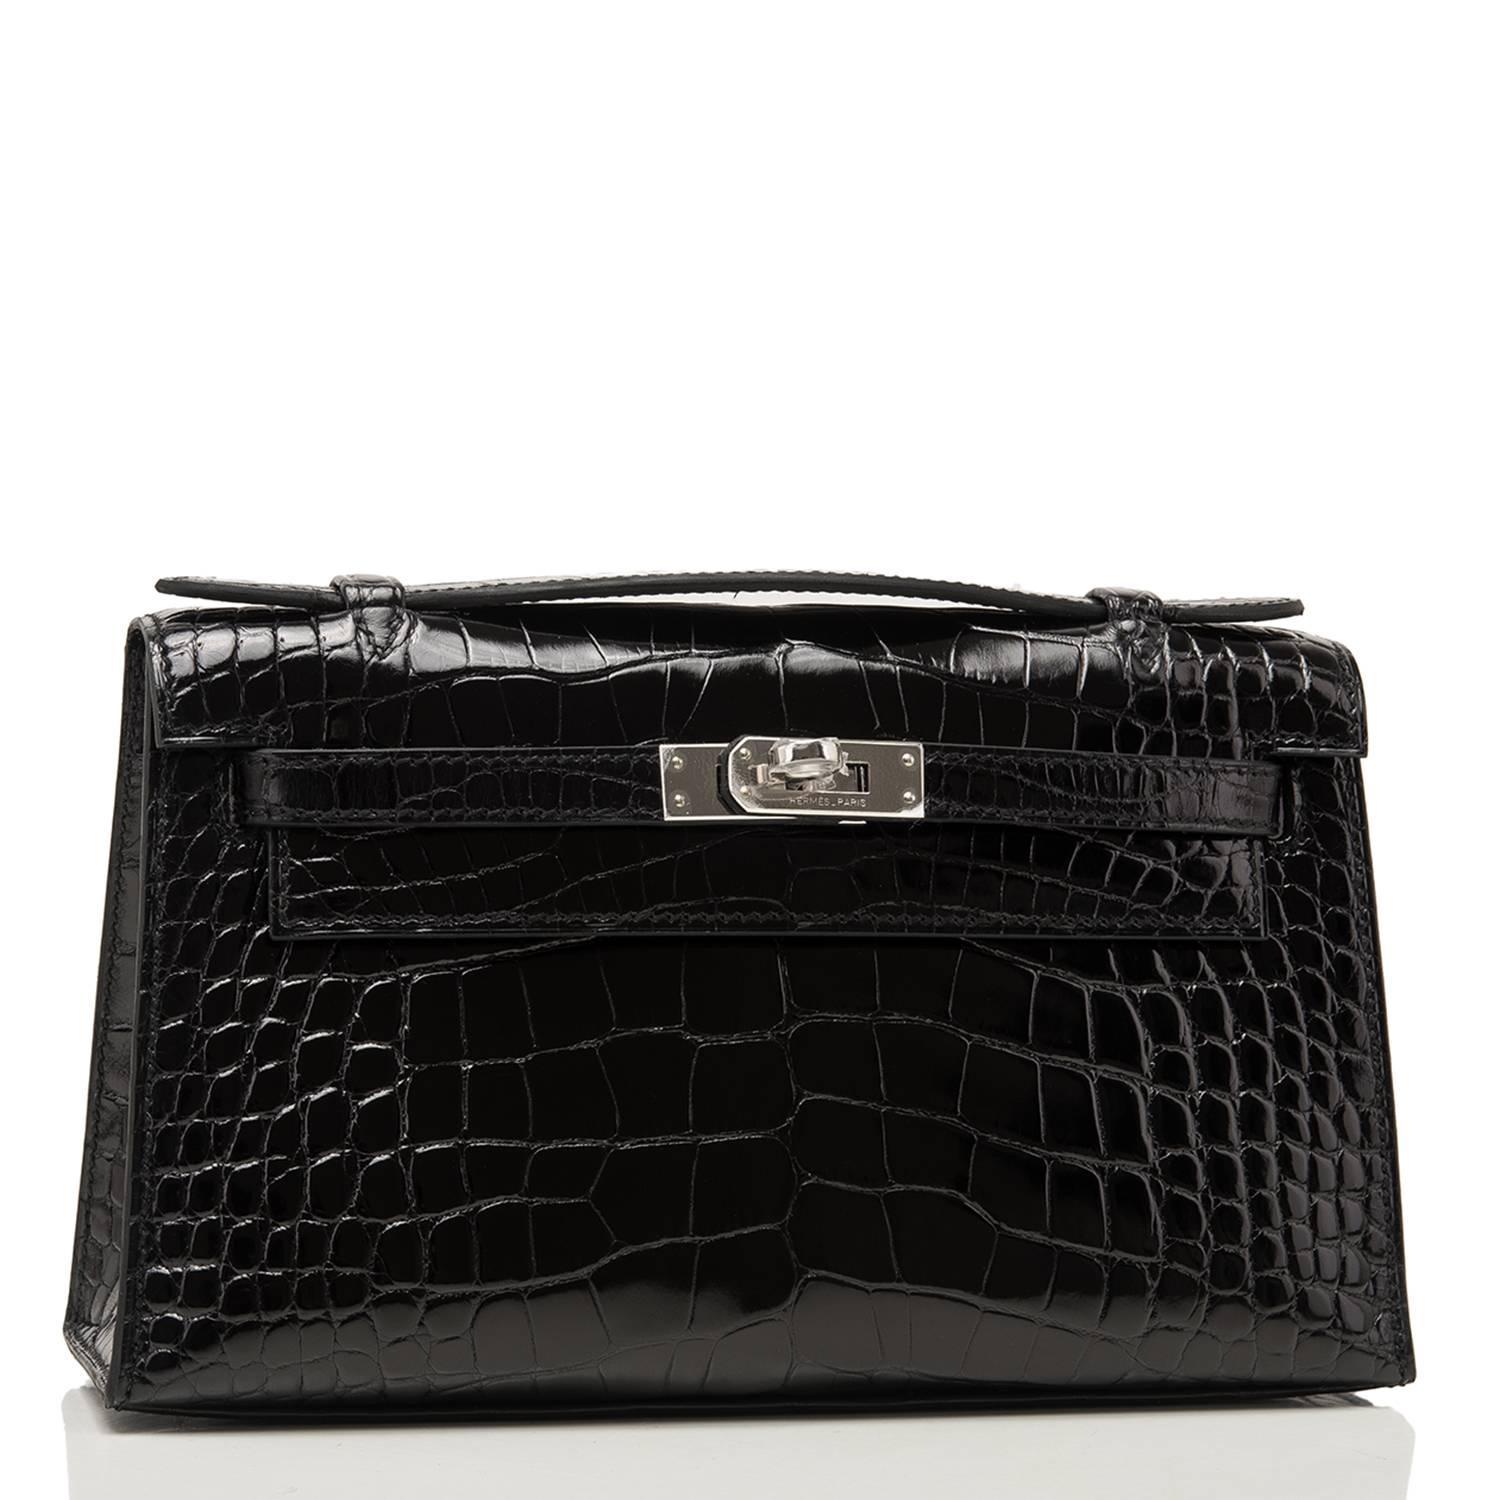 Hermes Black Mini Kelly Pochette clutch of shiny alligator with palladium hardware.

This Hermes Kelly Pochette a front flap with two straps, a toggle closure and a single flat handle.

The interior is lined with black chevre and has one wall